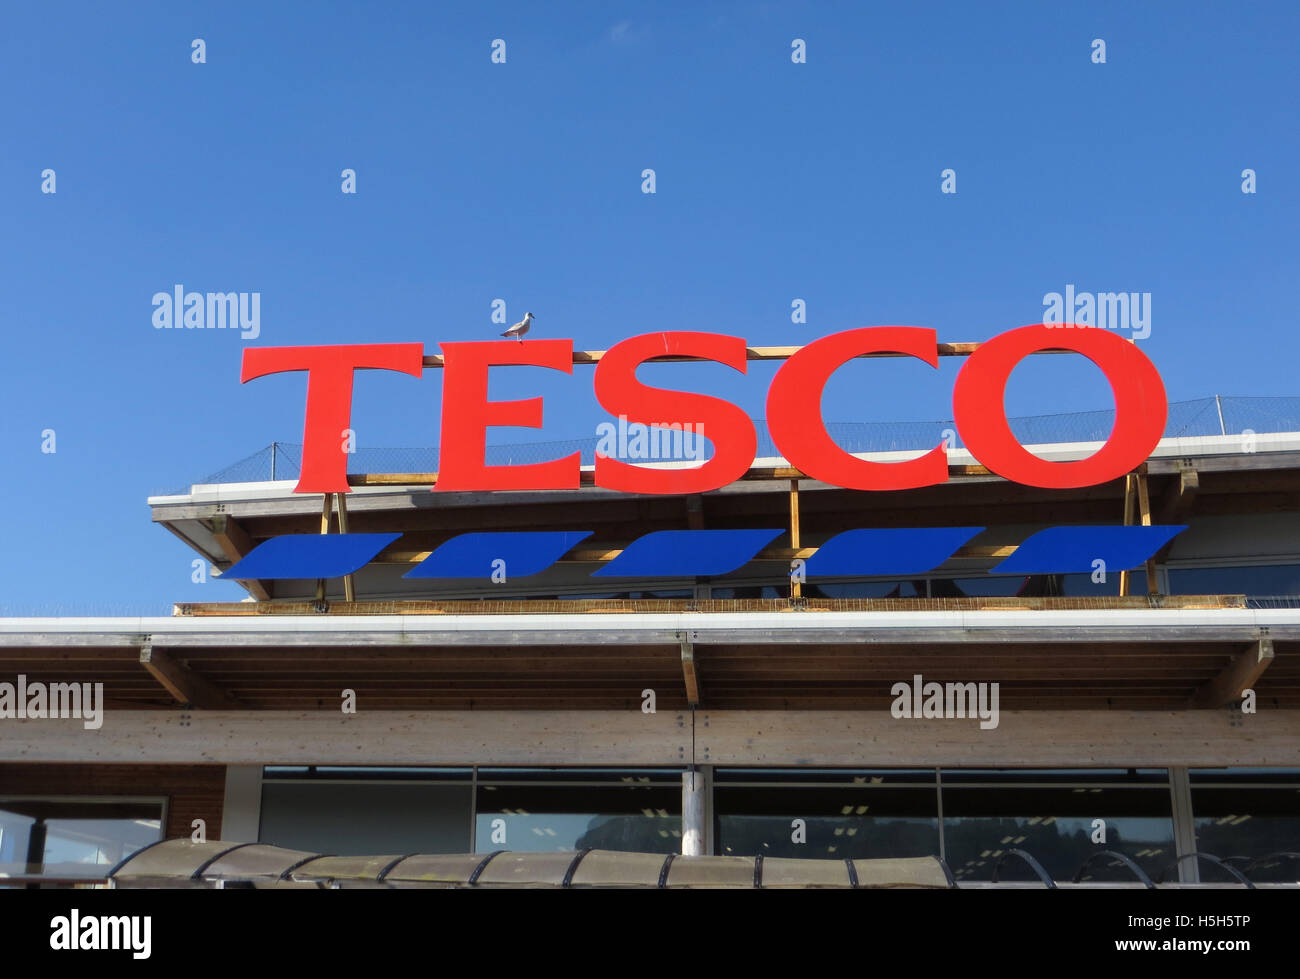 Seagull (juvenile herring gull (Larus argentatus)) perched on a Tesco sign against cloudless blue sky Stock Photo